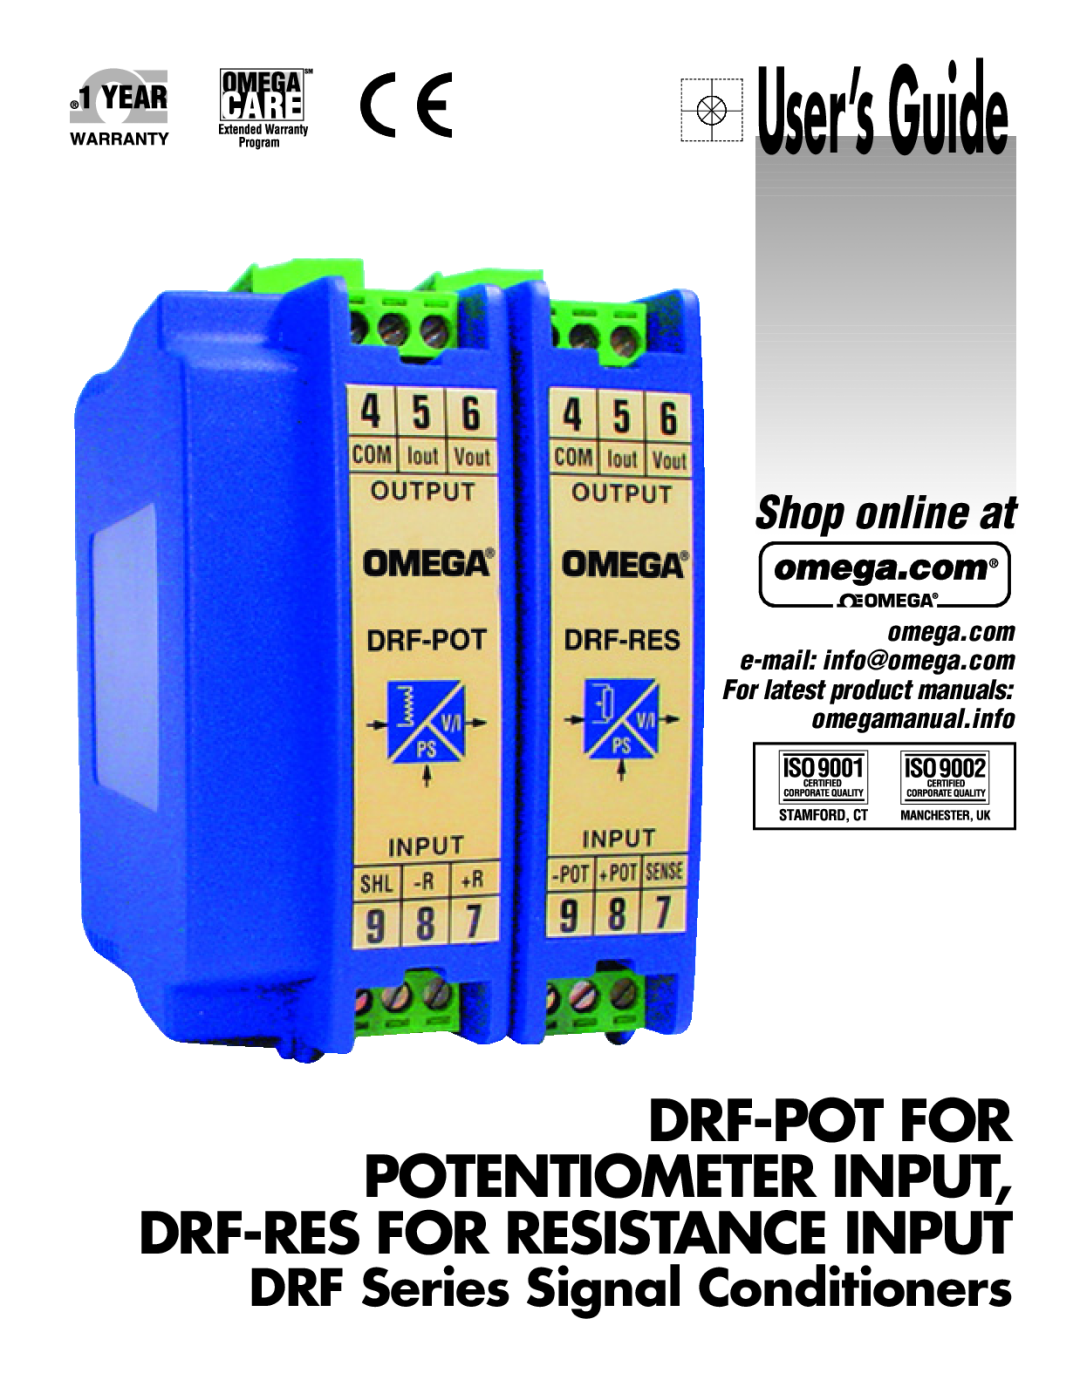 Omega Vehicle Security DRF-RES Series, DRF-POT manual User’s Guide, DRF Series Signal Conditioners, Shop online at 